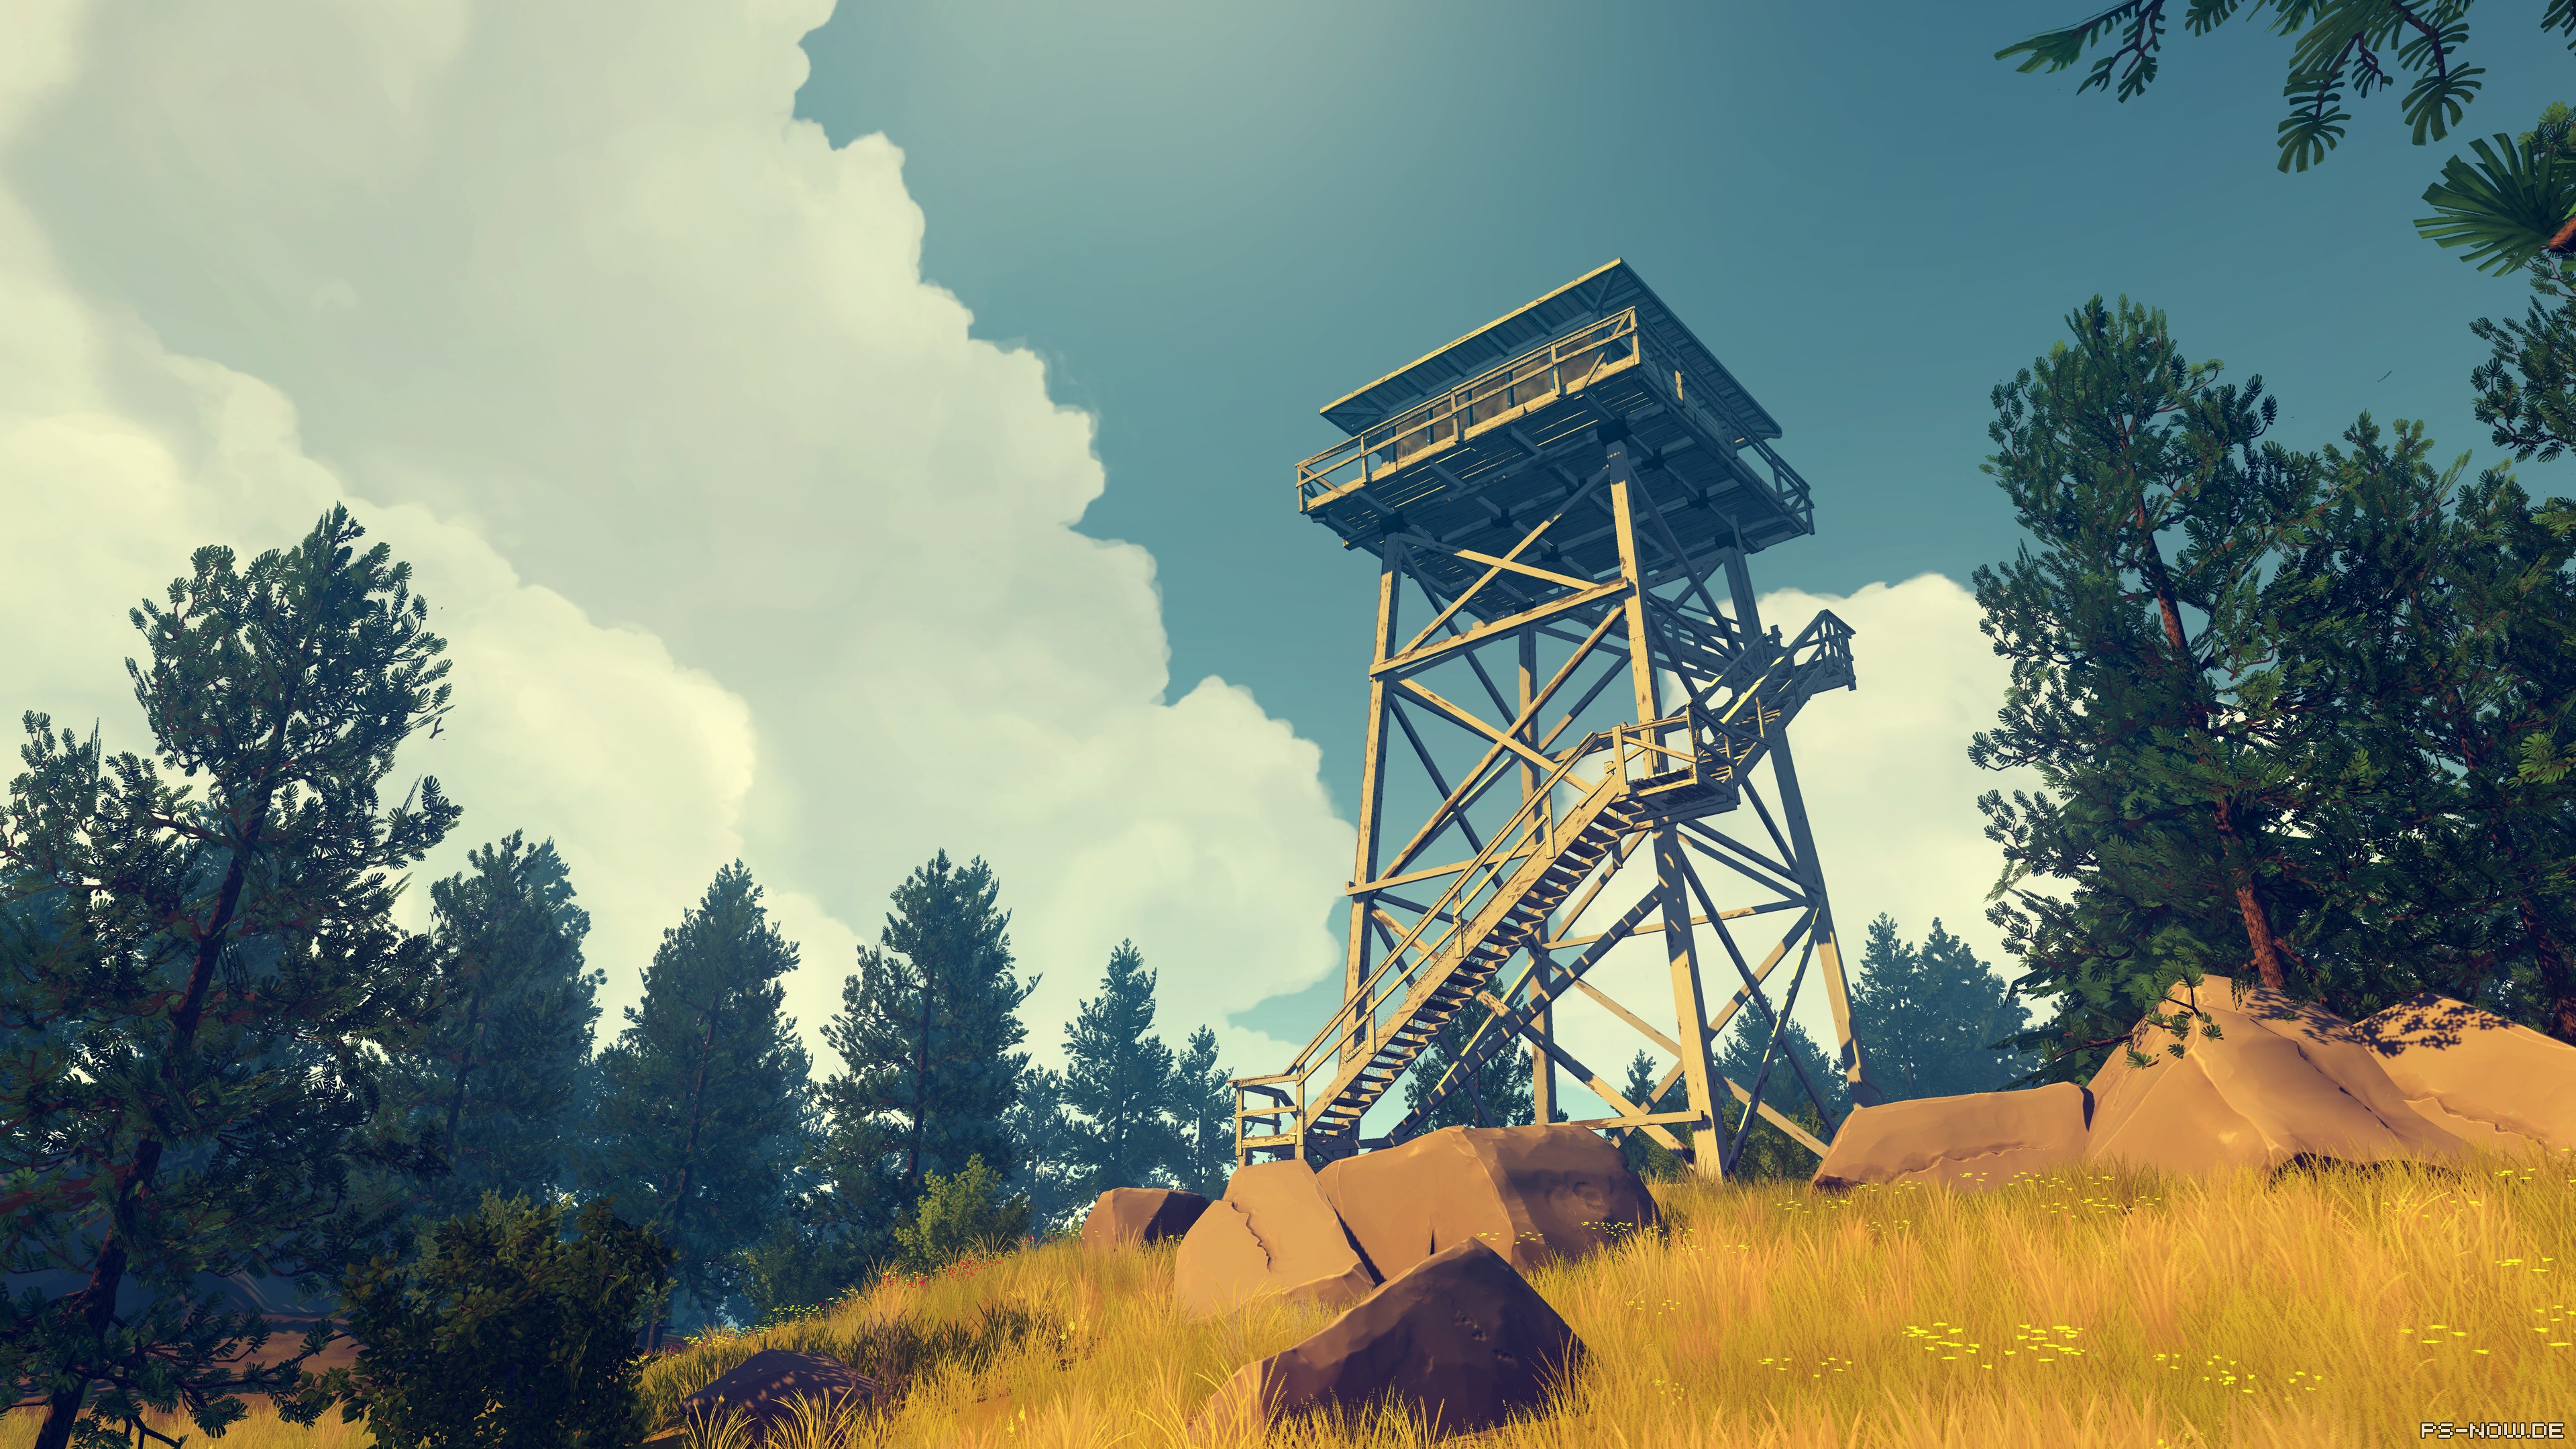 Video Games Firewatch Video Game Art Nature Trees Forest Clouds Sky Illustration 3840x2160